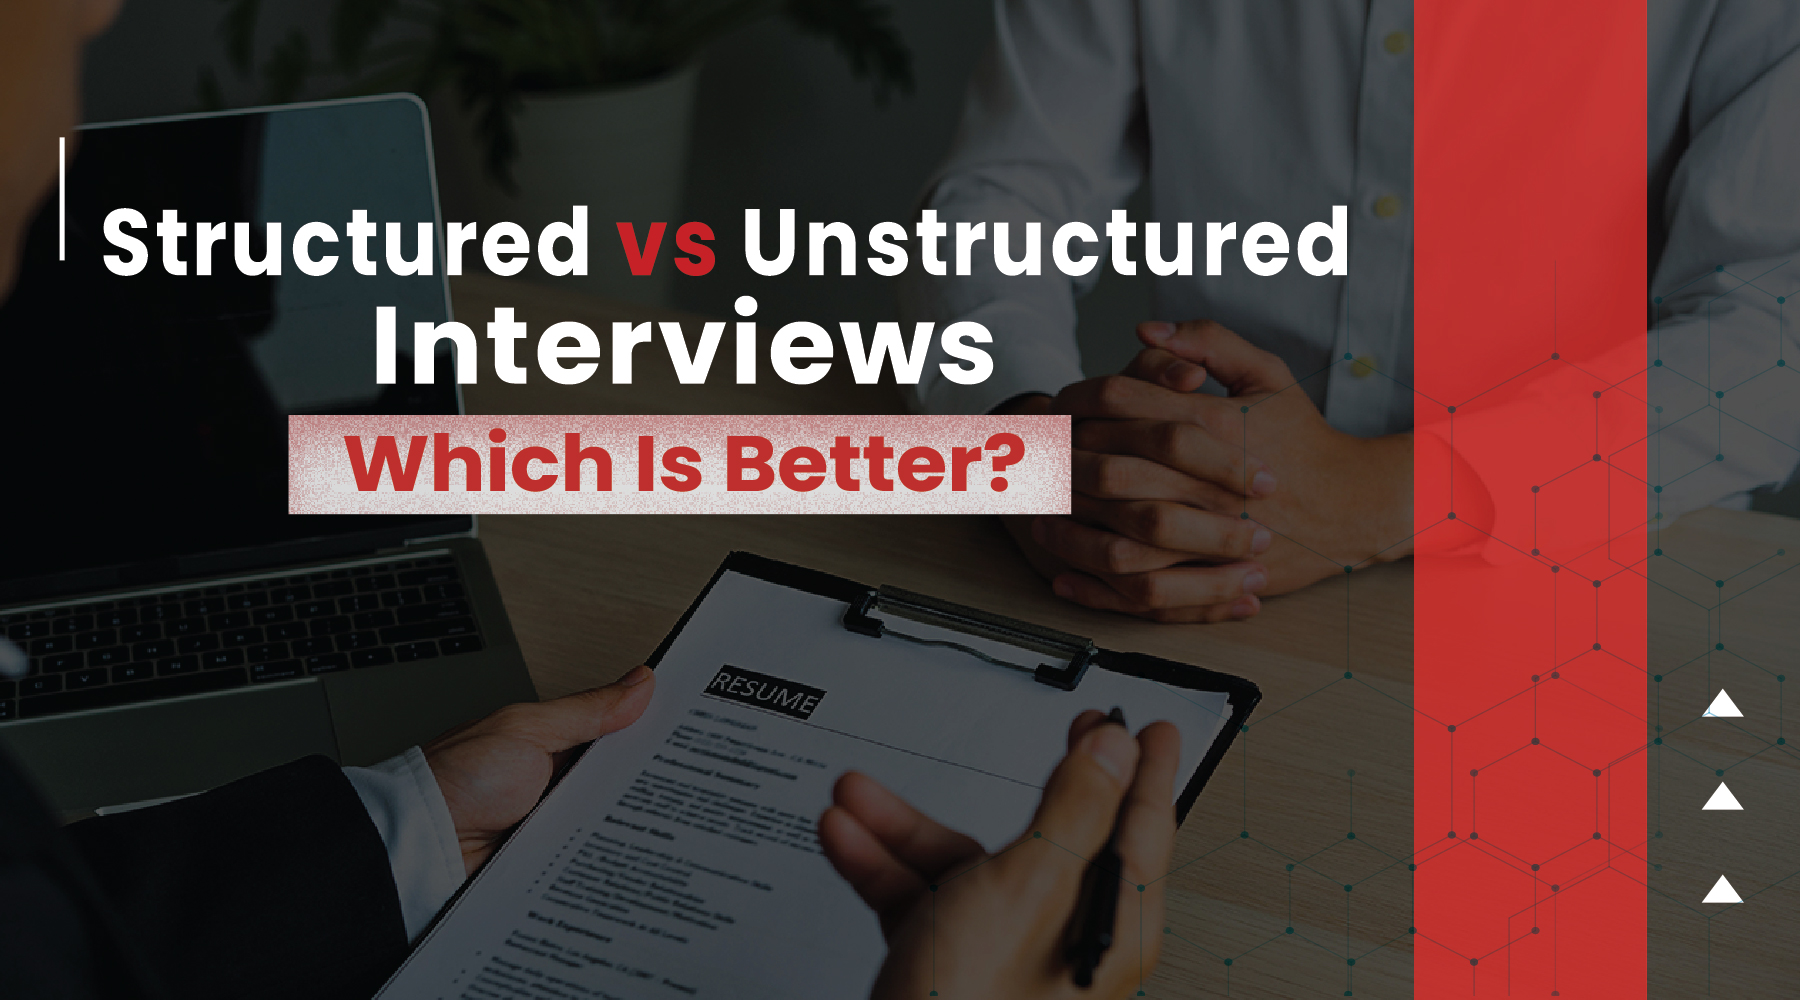 structured vs unstructured interviews, which is better